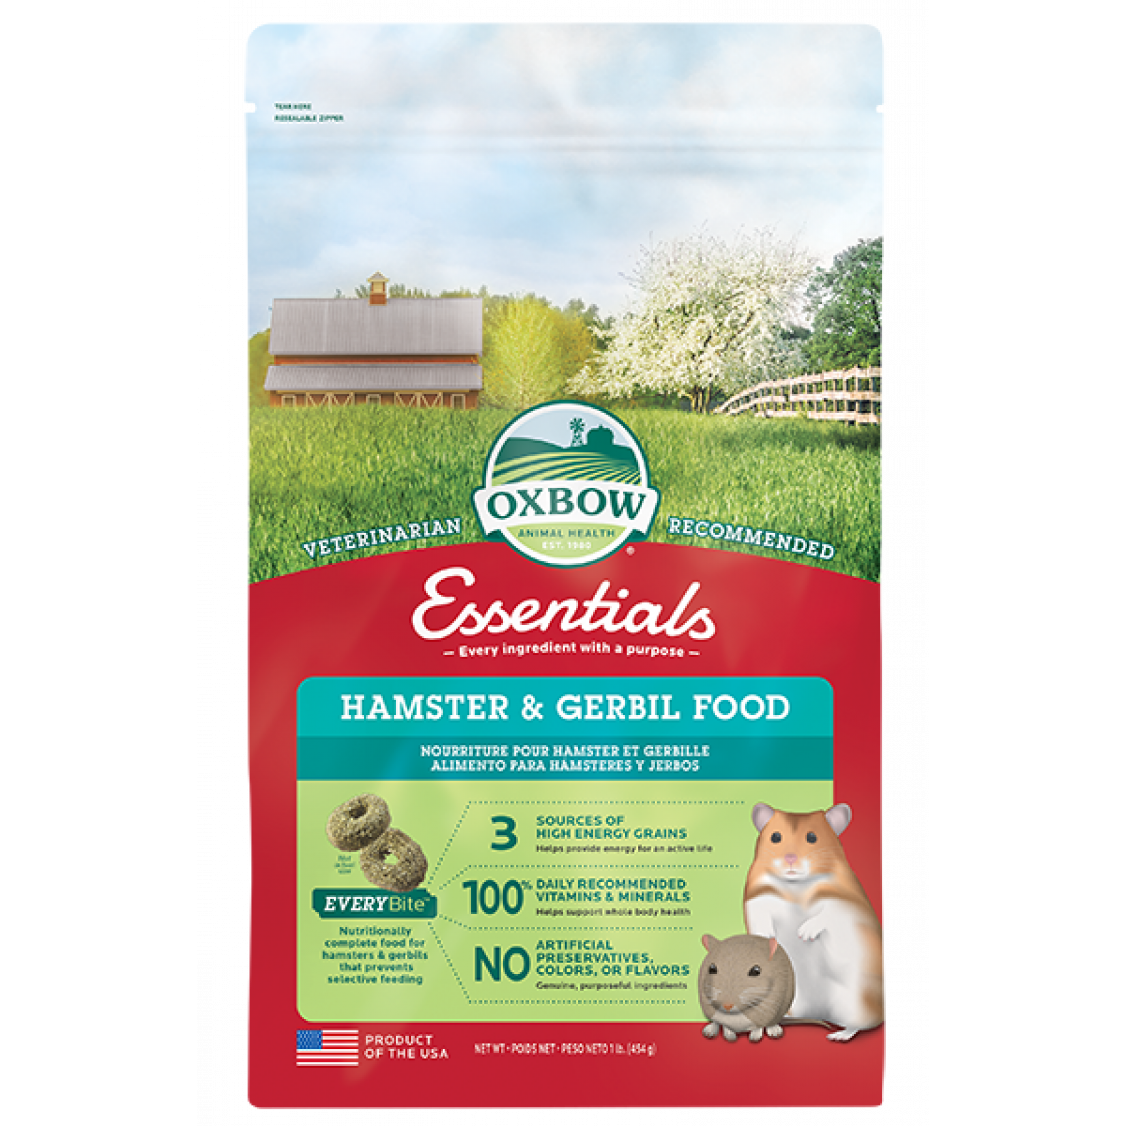 Oxbow Essentials - Hamster and Gerbil Food (1 lb)